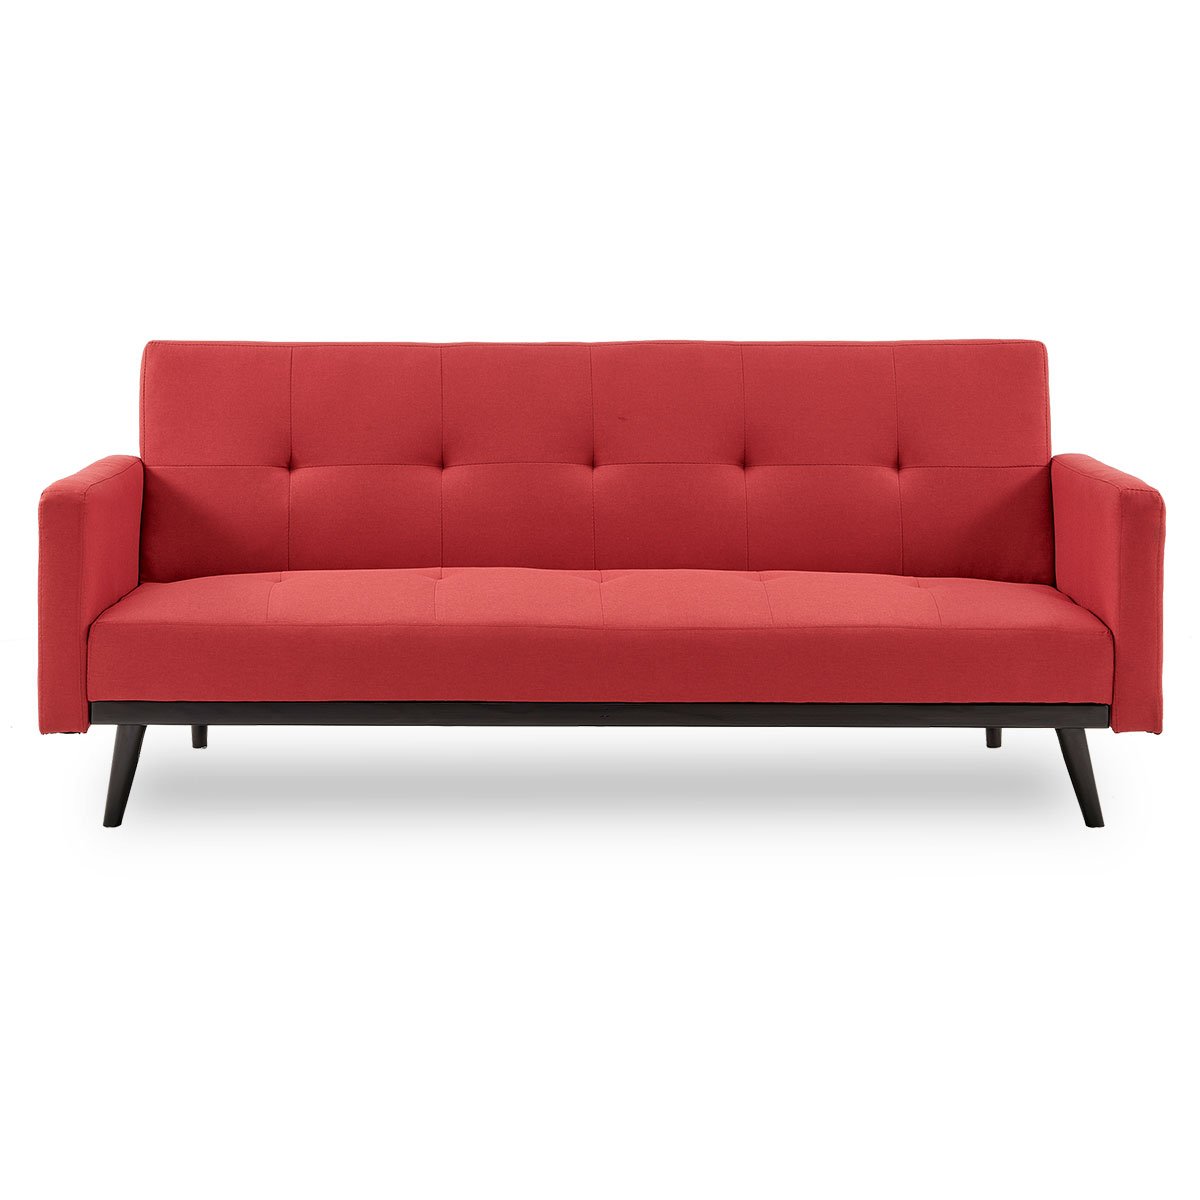 Sarantino Tufted Faux Linen 3-Seater Sofa Bed with Armrests - Red 2